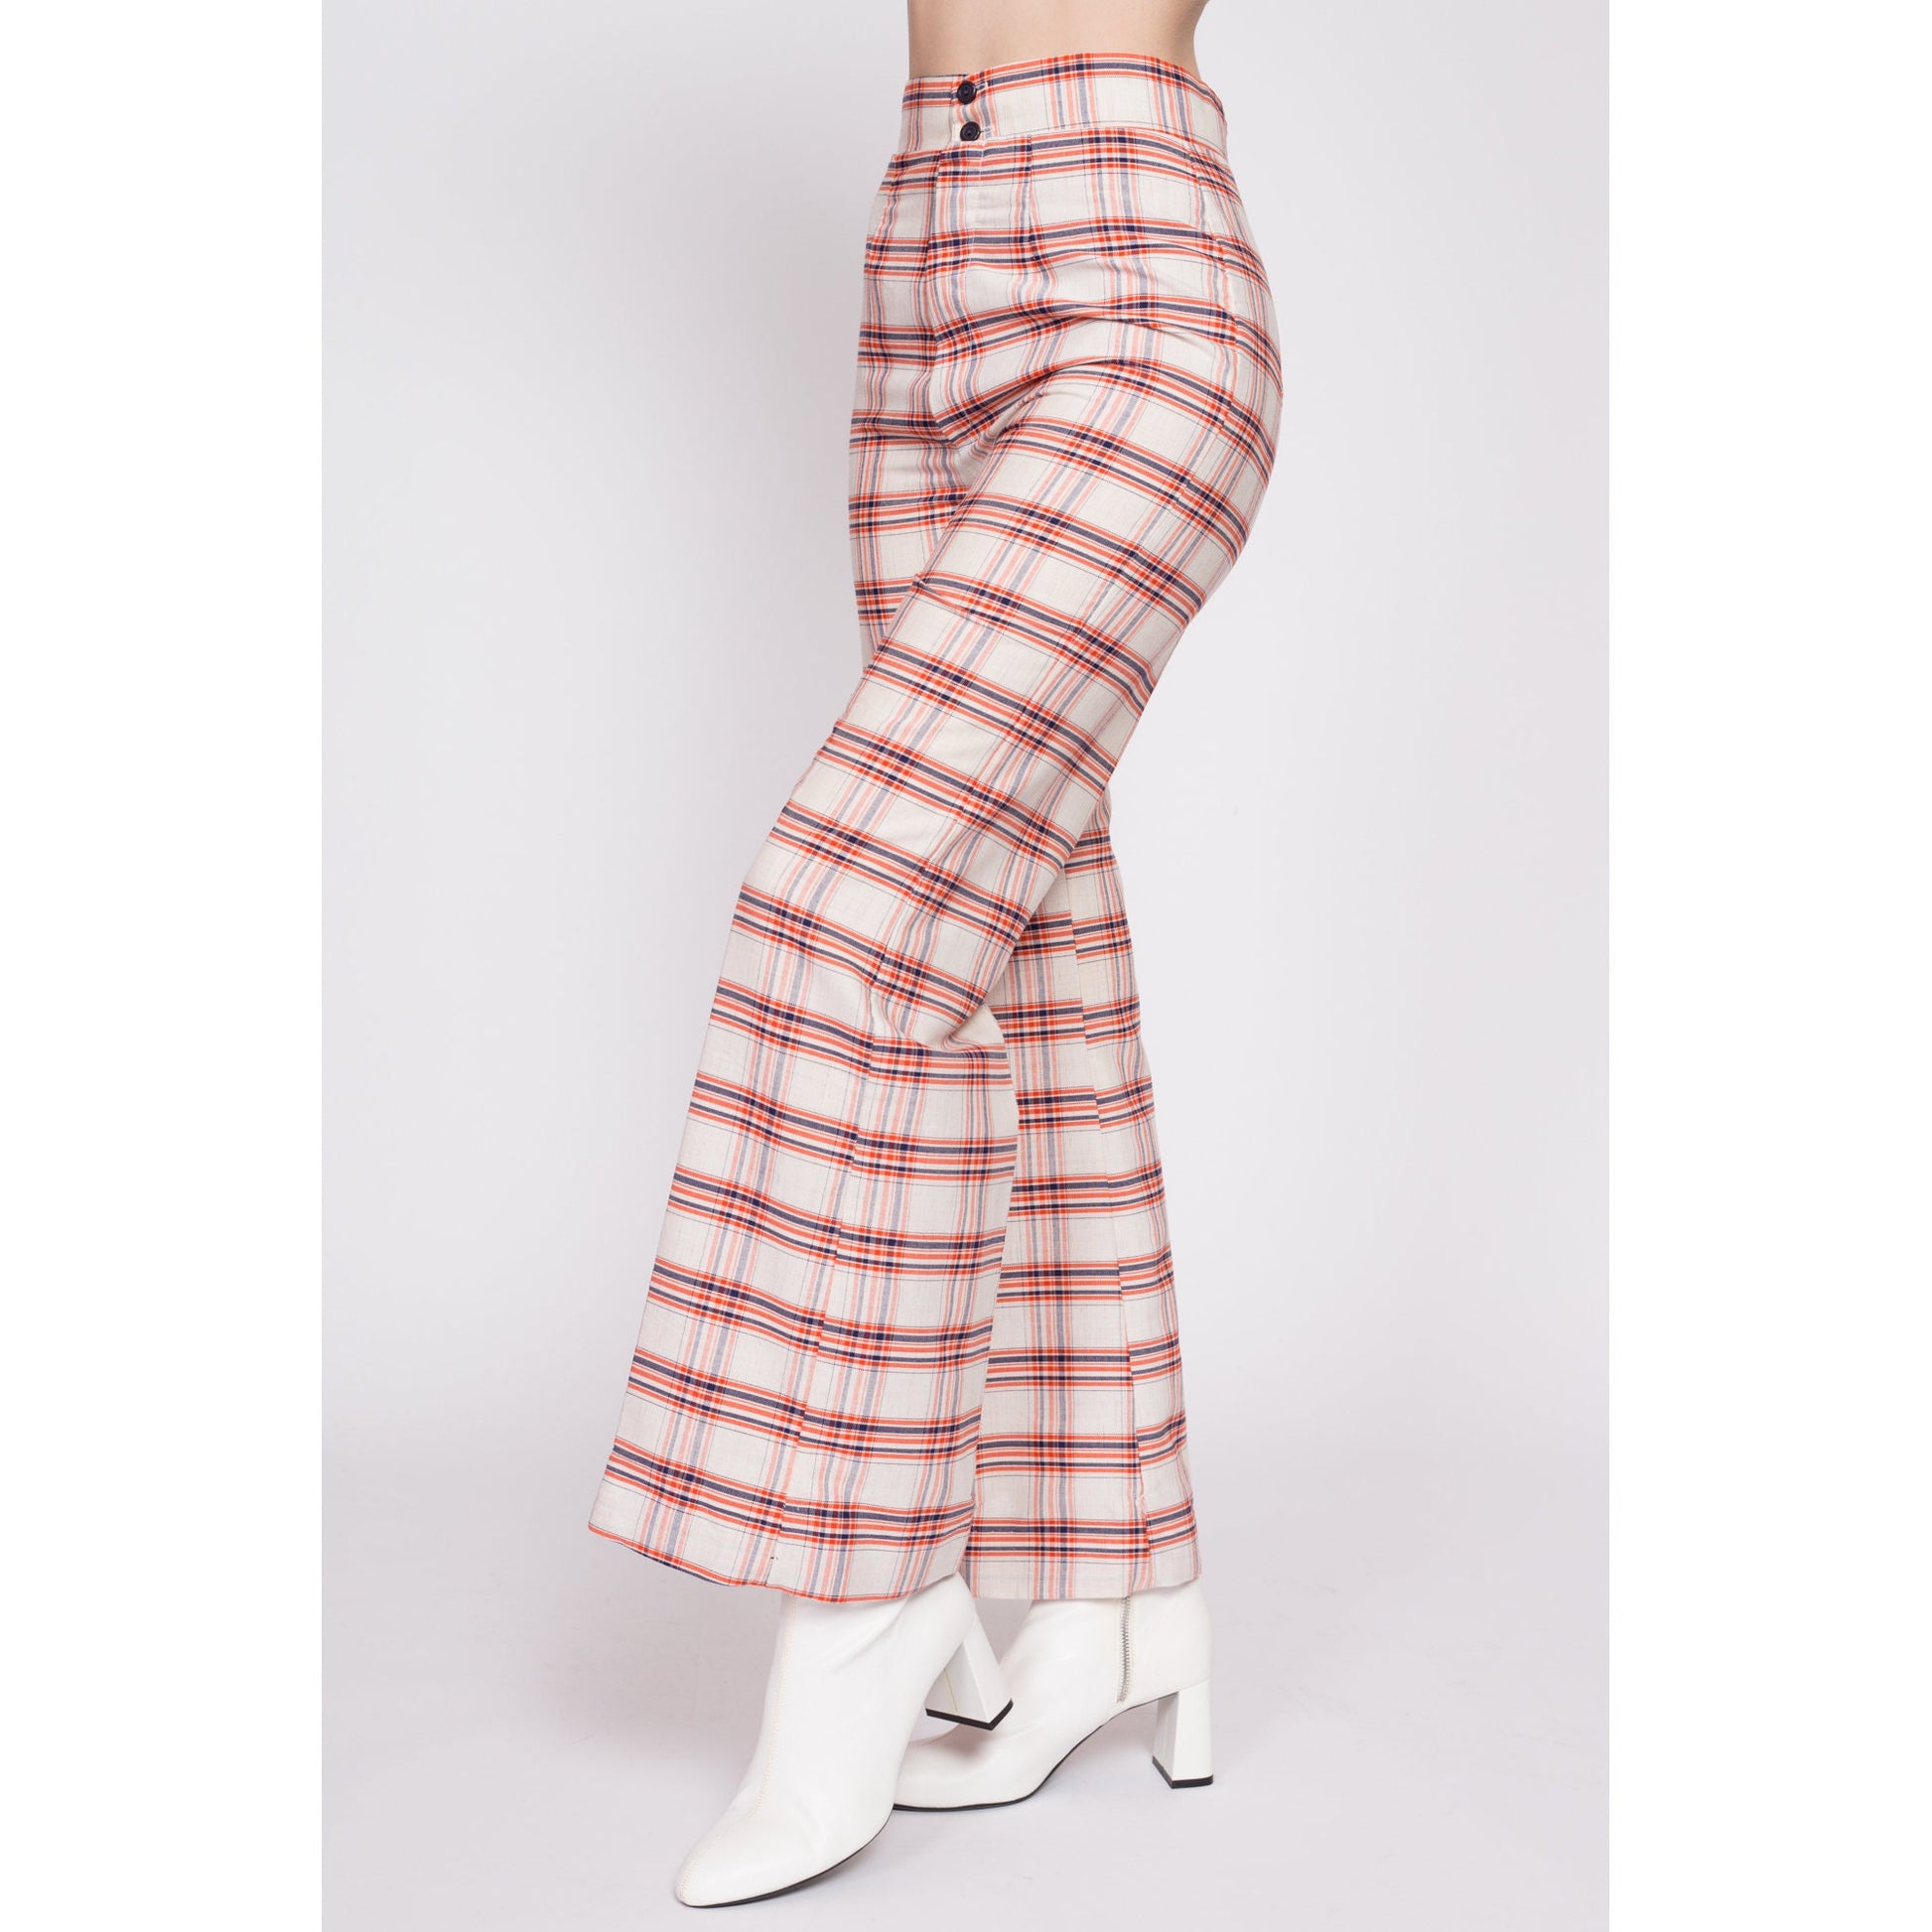 70s Orange & White Plaid High Waisted Pants - Small, 26.5" | Vintage Flared Retro Trousers